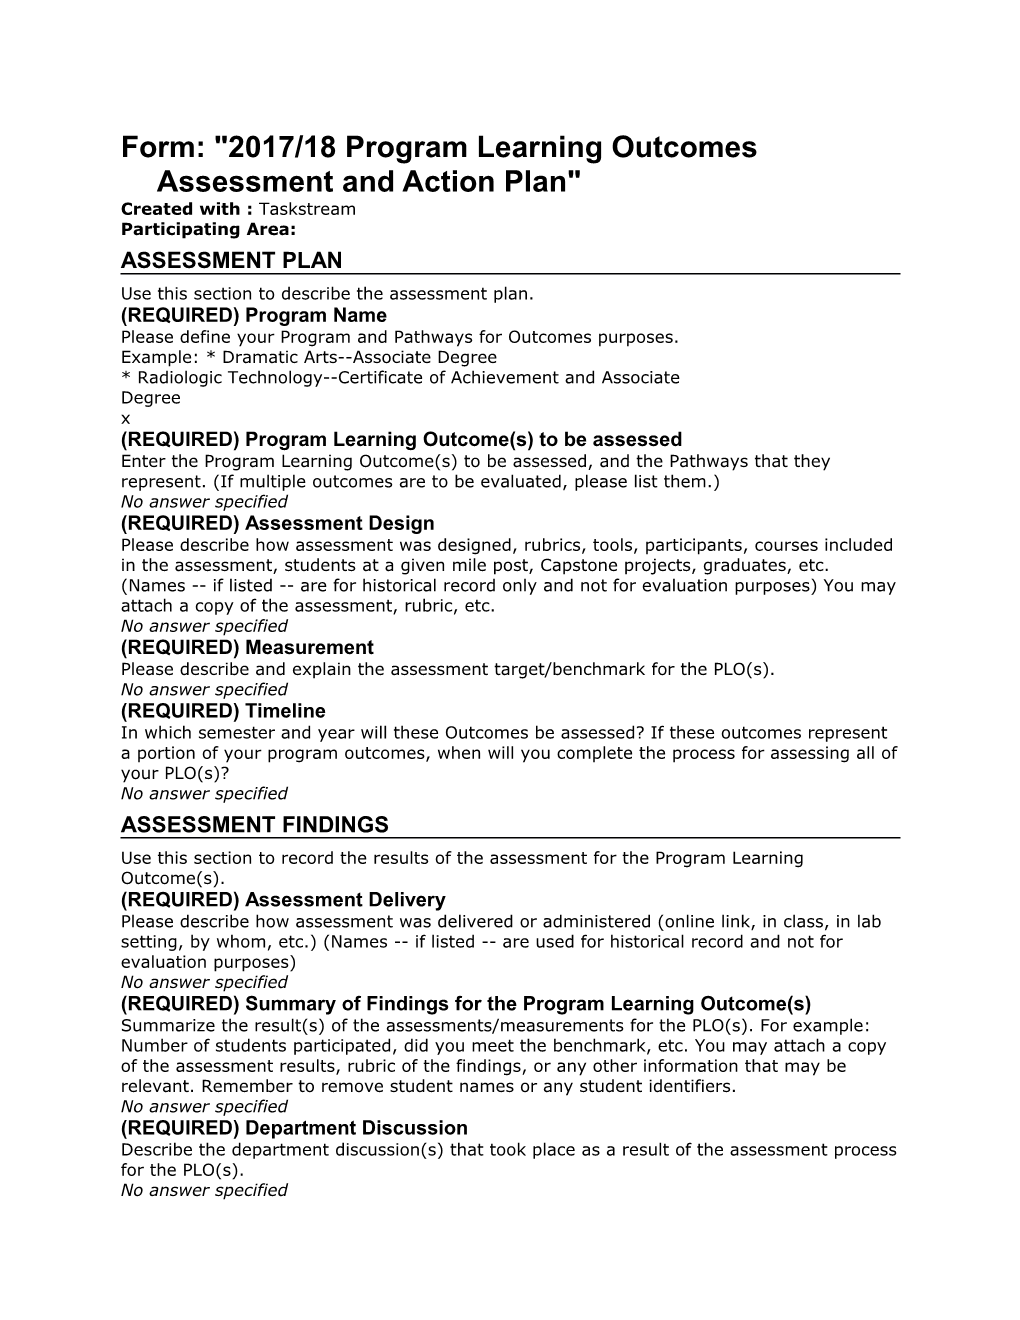 Form: 2017/18 Program Learning Outcomes Assessment and Action Plan